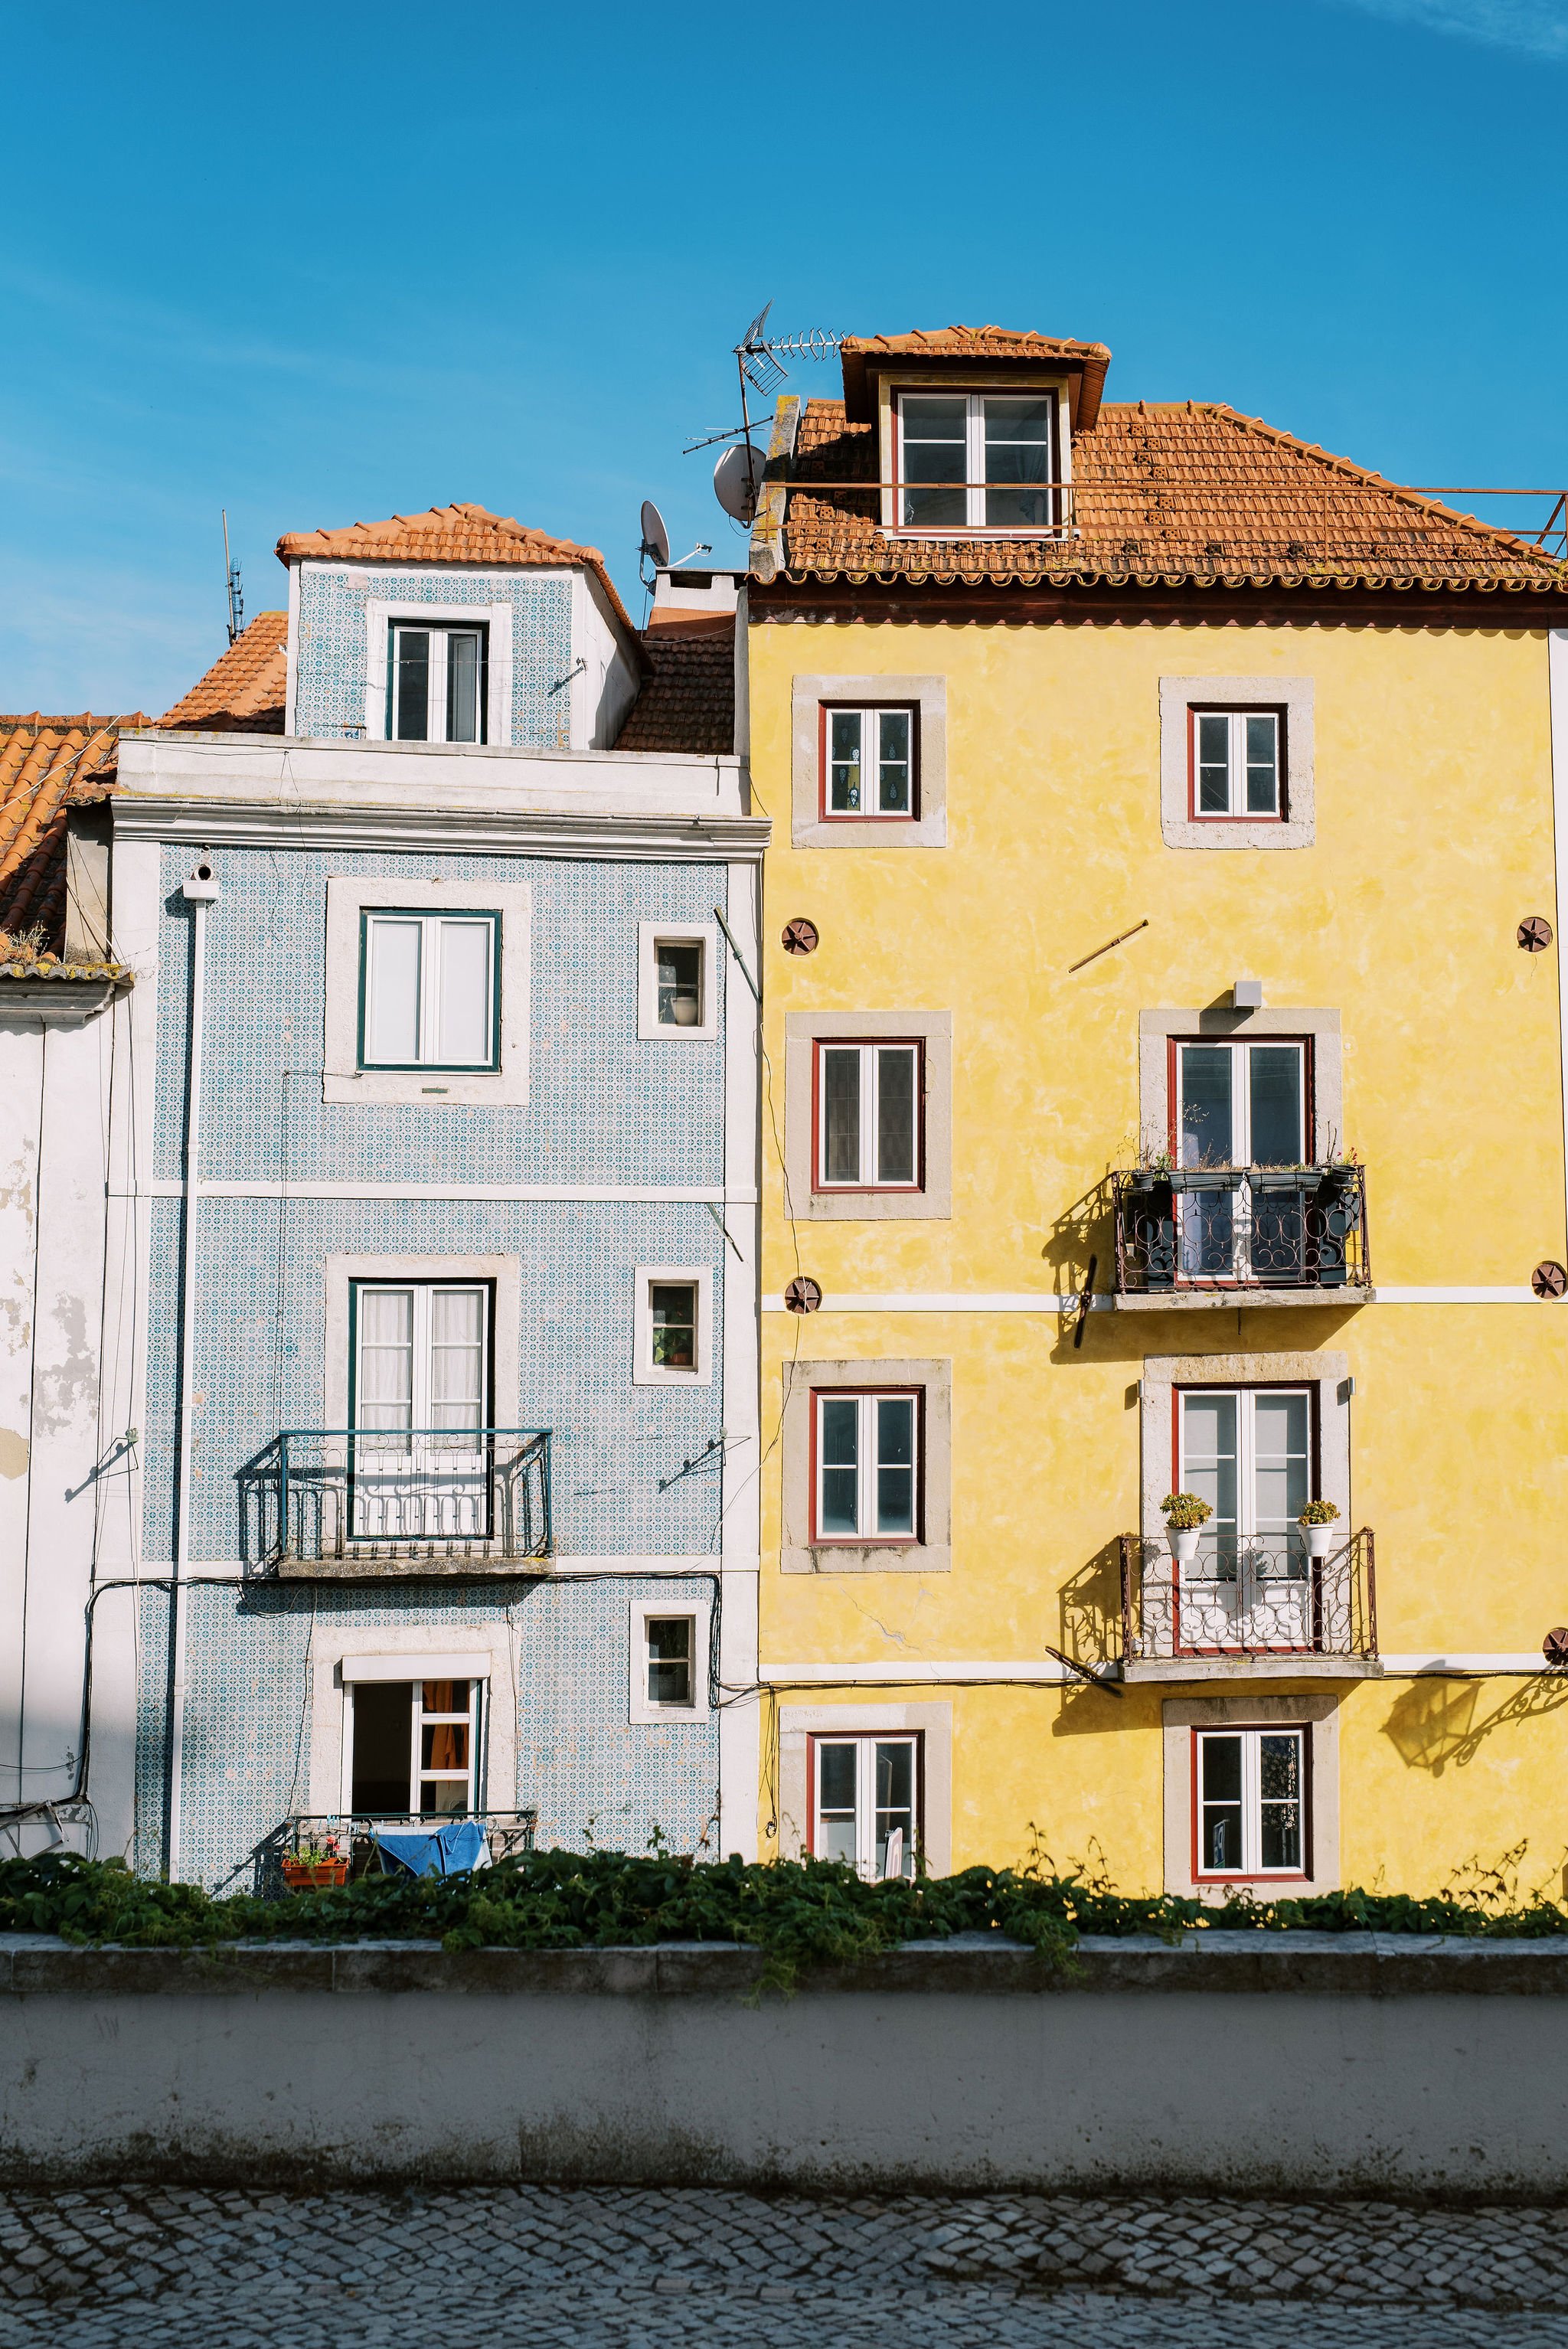 Two buildings next to each other in the city of Lisbon, one with blue and white tiles, the other with yellow walls, showing the colorful architecture of Portugal's capital